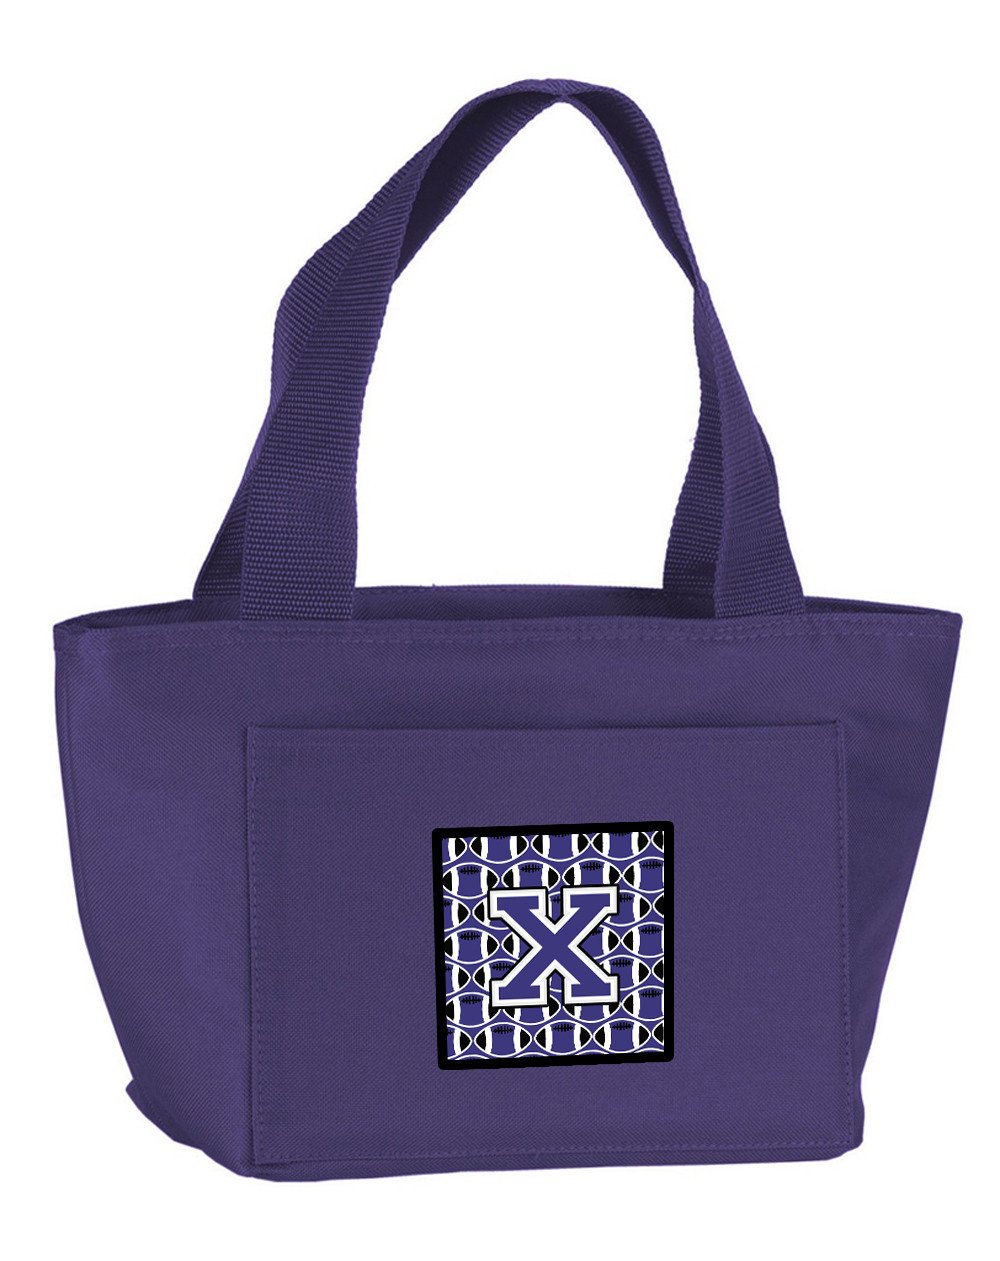 Letter X Football Purple and White Lunch Bag CJ1068-XPR-8808 by Caroline's Treasures